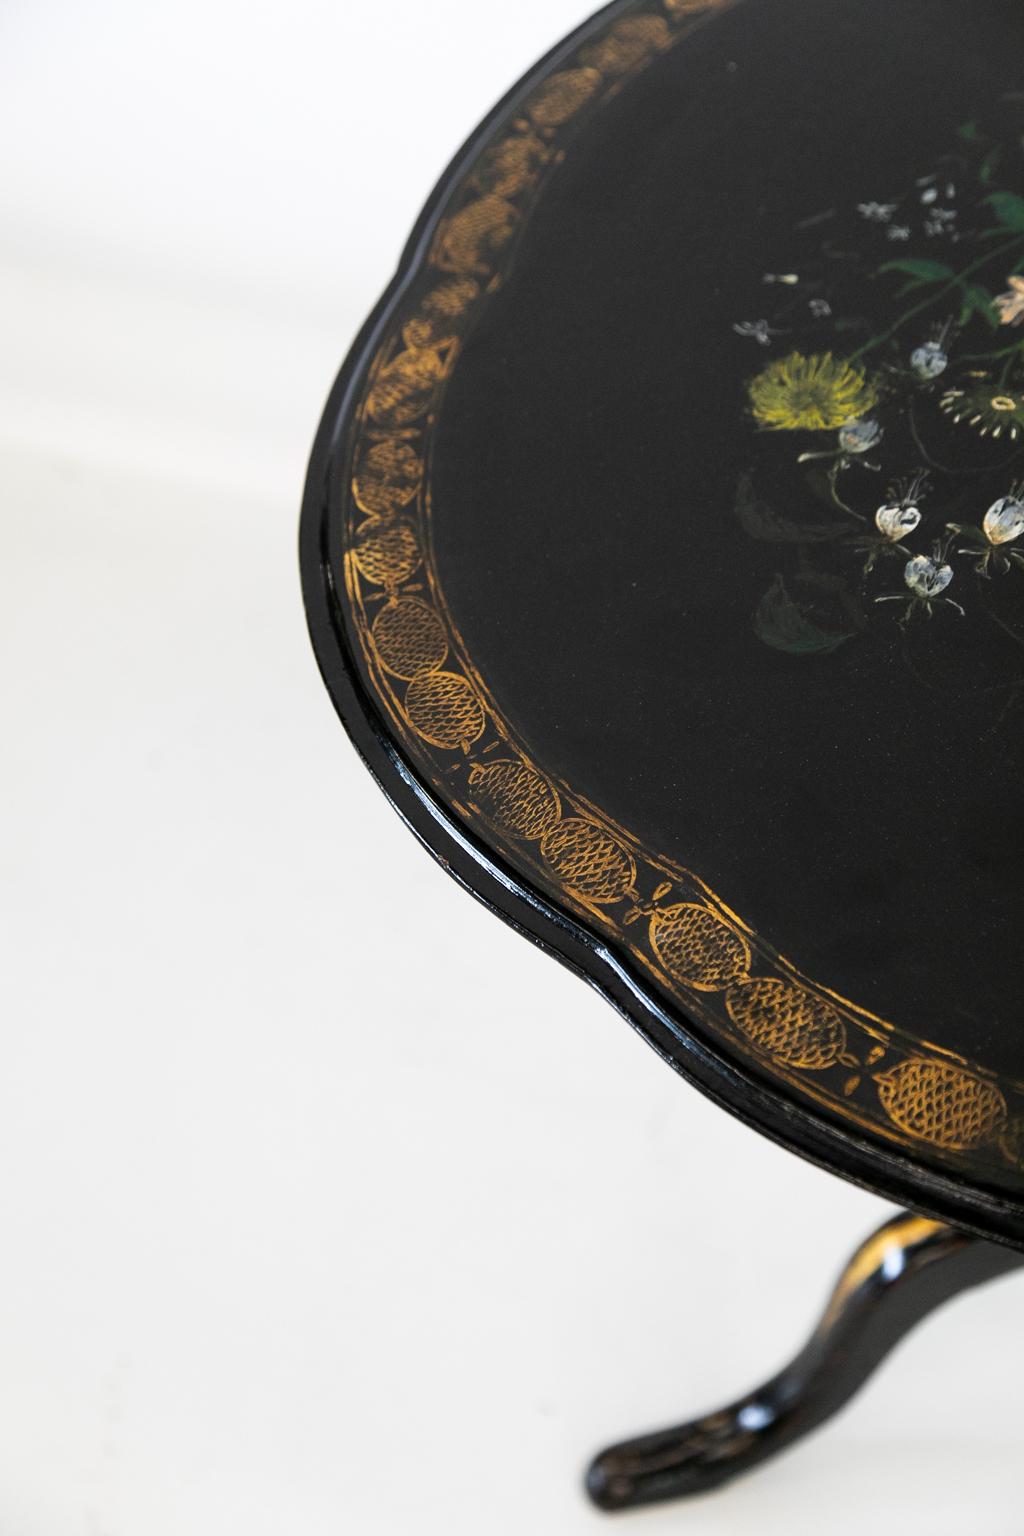 Mid-19th Century English Lacquer Tilt-Top Table